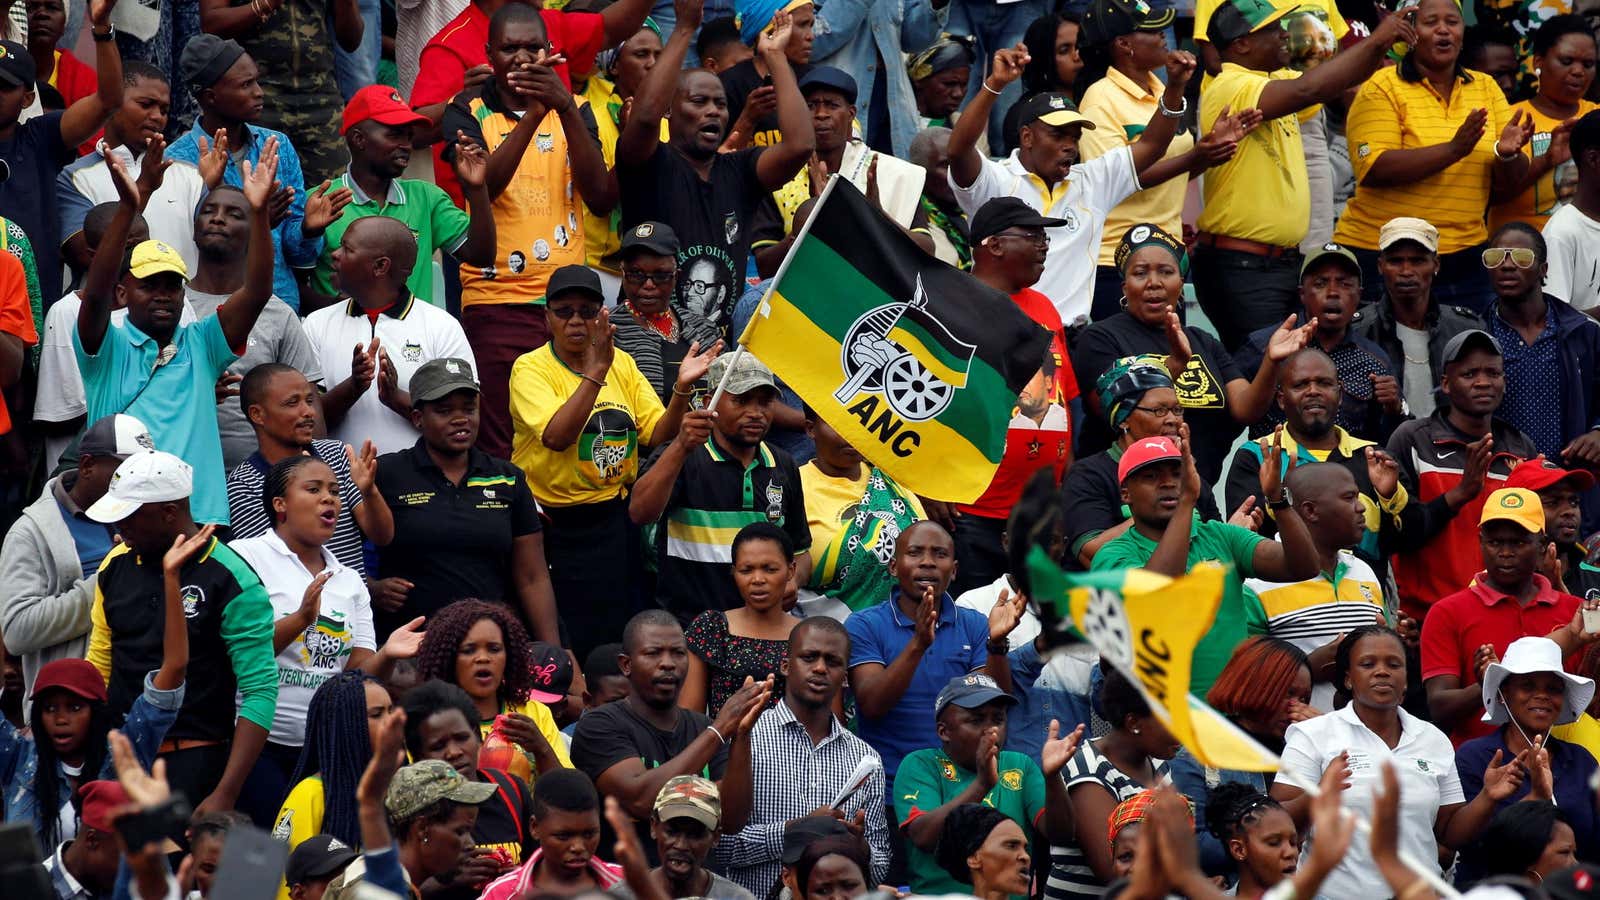 Supporters of the ANC wave a flag during the party’s 106th anniversary celebrations, in East London, South Africa, January 13, 2018.